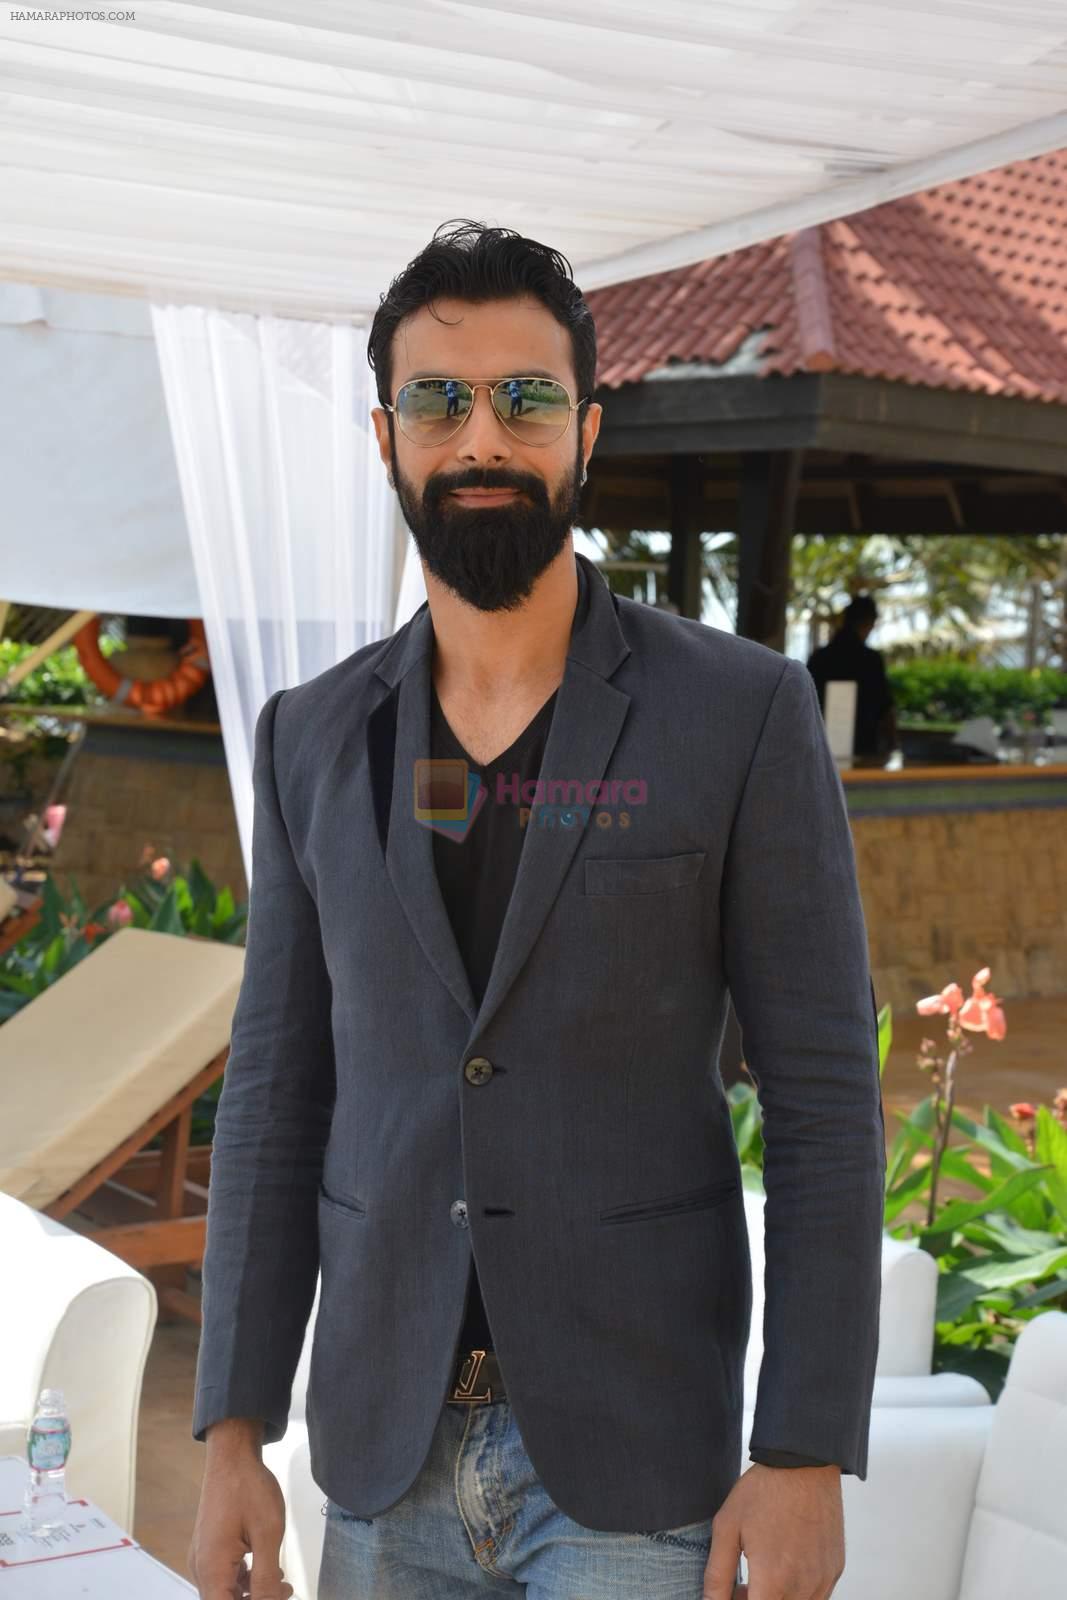 Ashmit Patel at India Today Body Rocks in J W Marriott on 15th March 2015